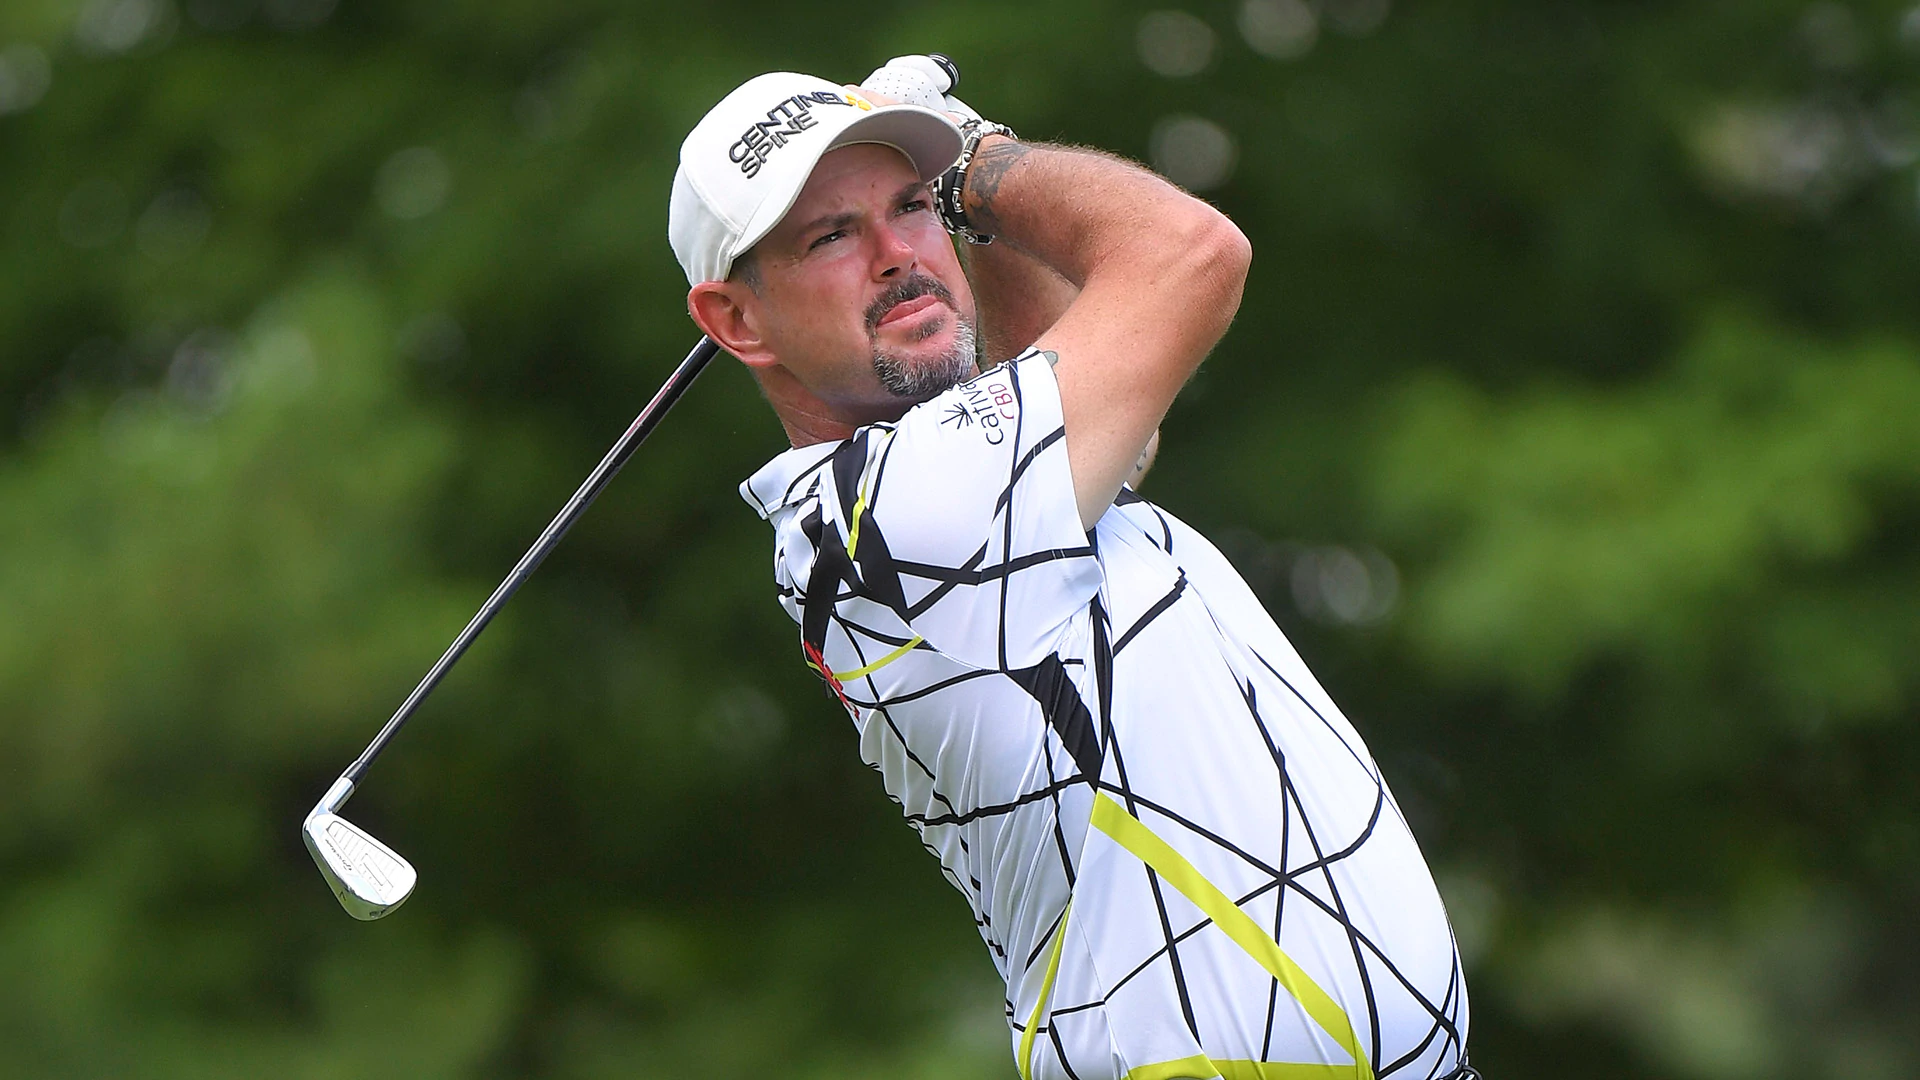 Watch: Rory Sabbatini makes birdie-3, only hits the ball twice